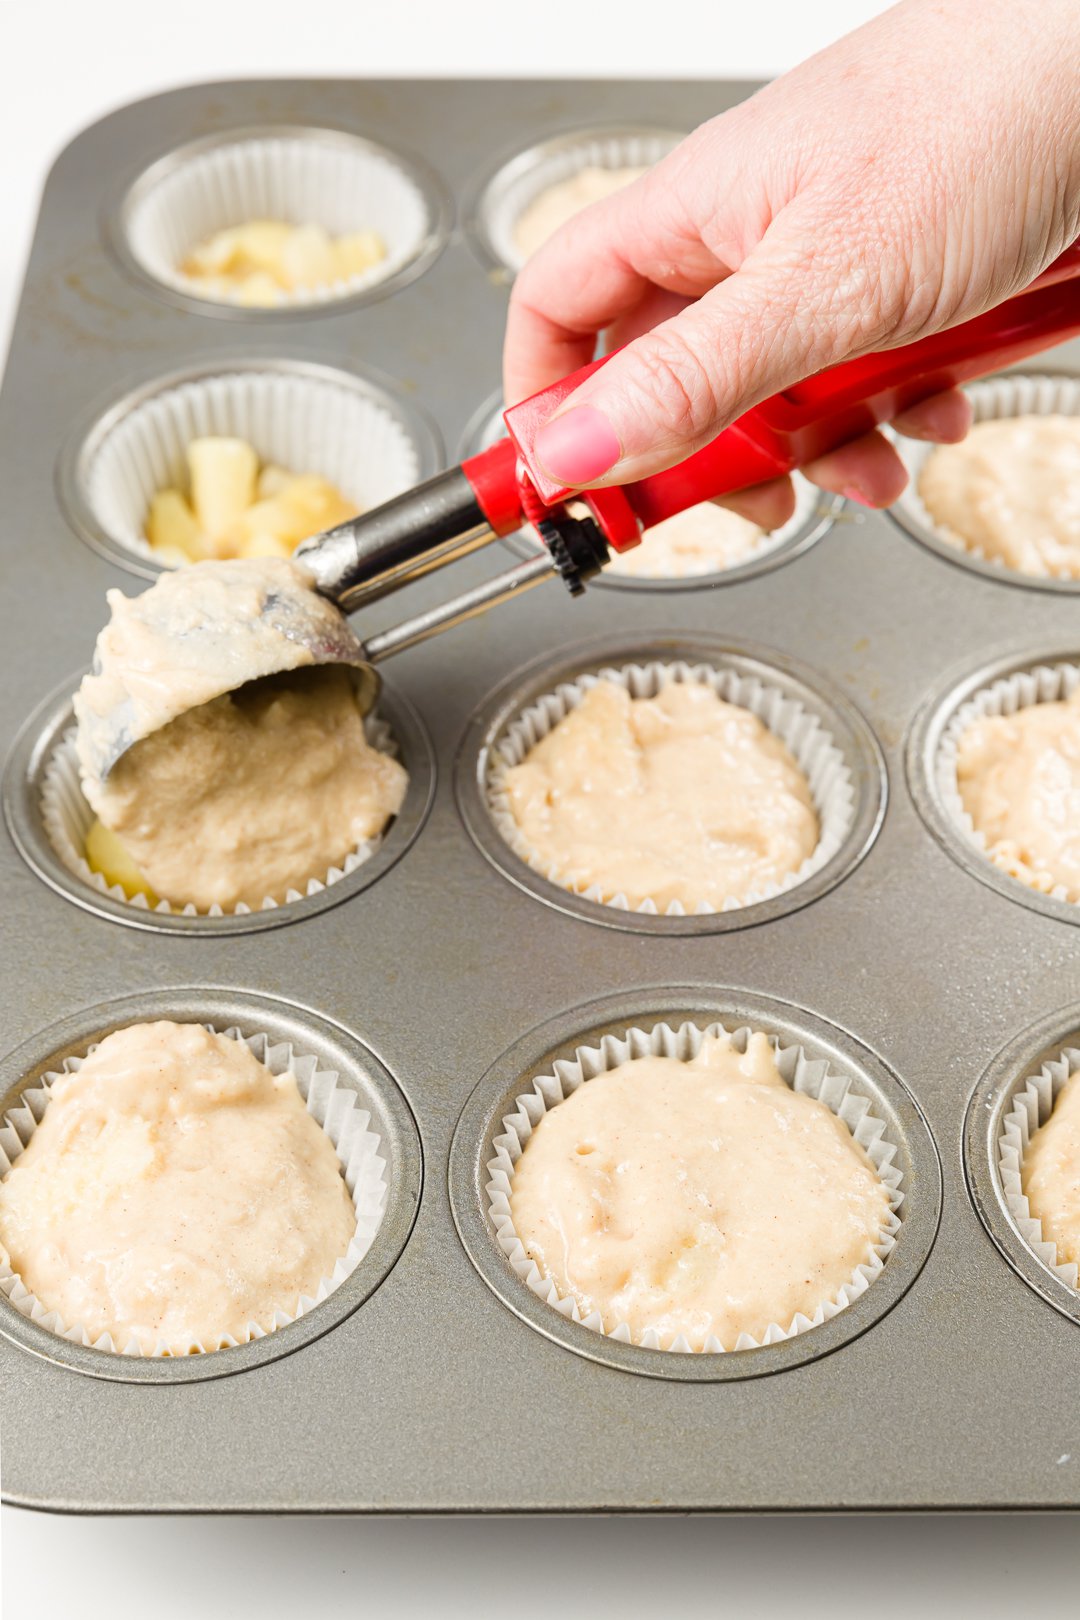 Adding batter to pineapple-upside down cupcakes